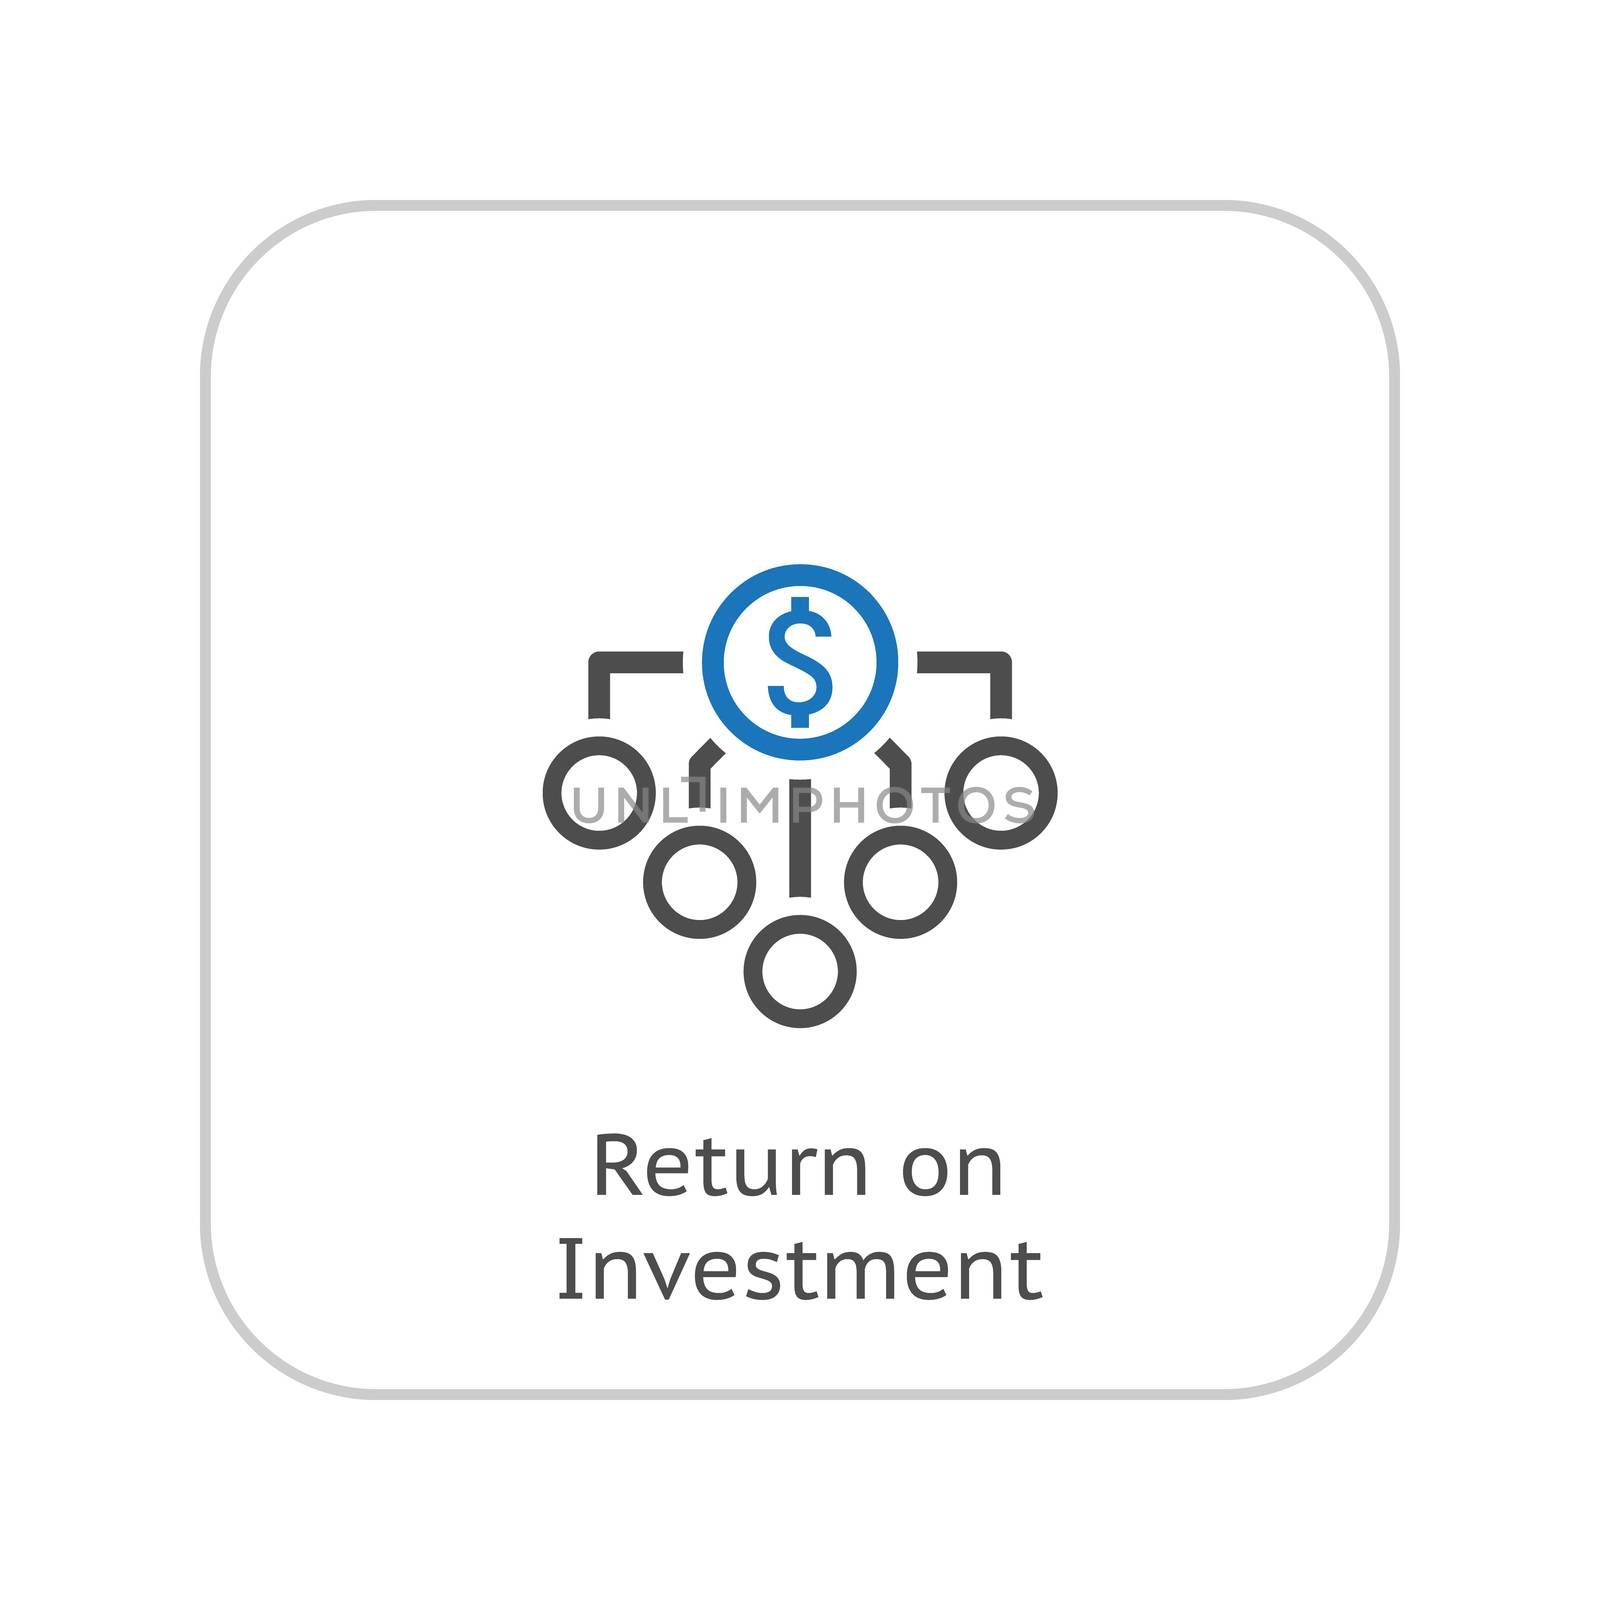 Return on Investment Icon. Business Concept. Flat Design. by WaD